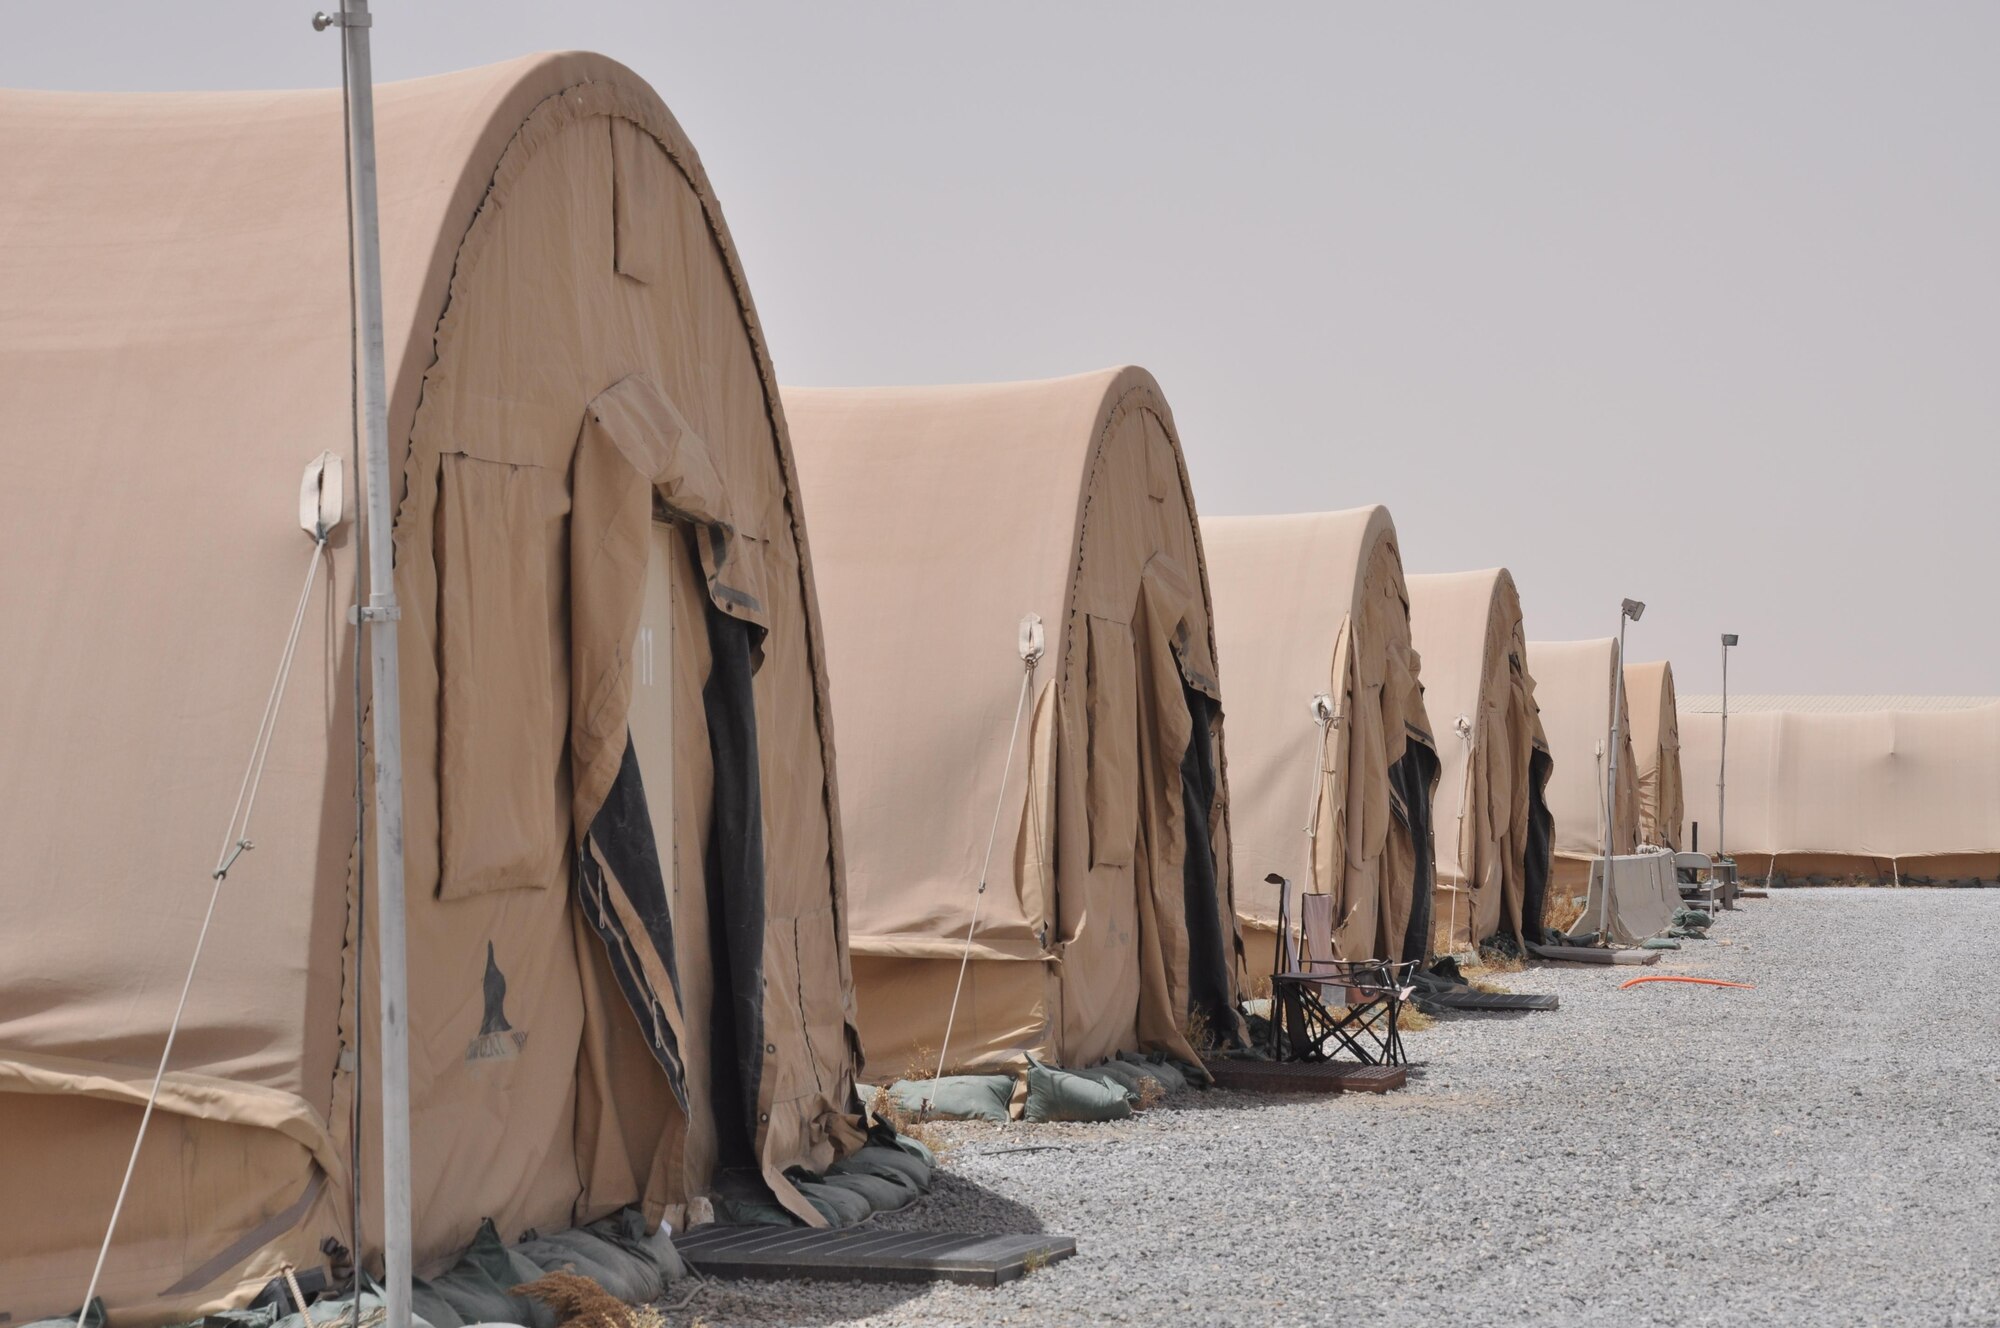 A construction project is currently underway to prepare 33 new relocatable buildings, or trailer structures, for Airmen to reside in during their deployment.